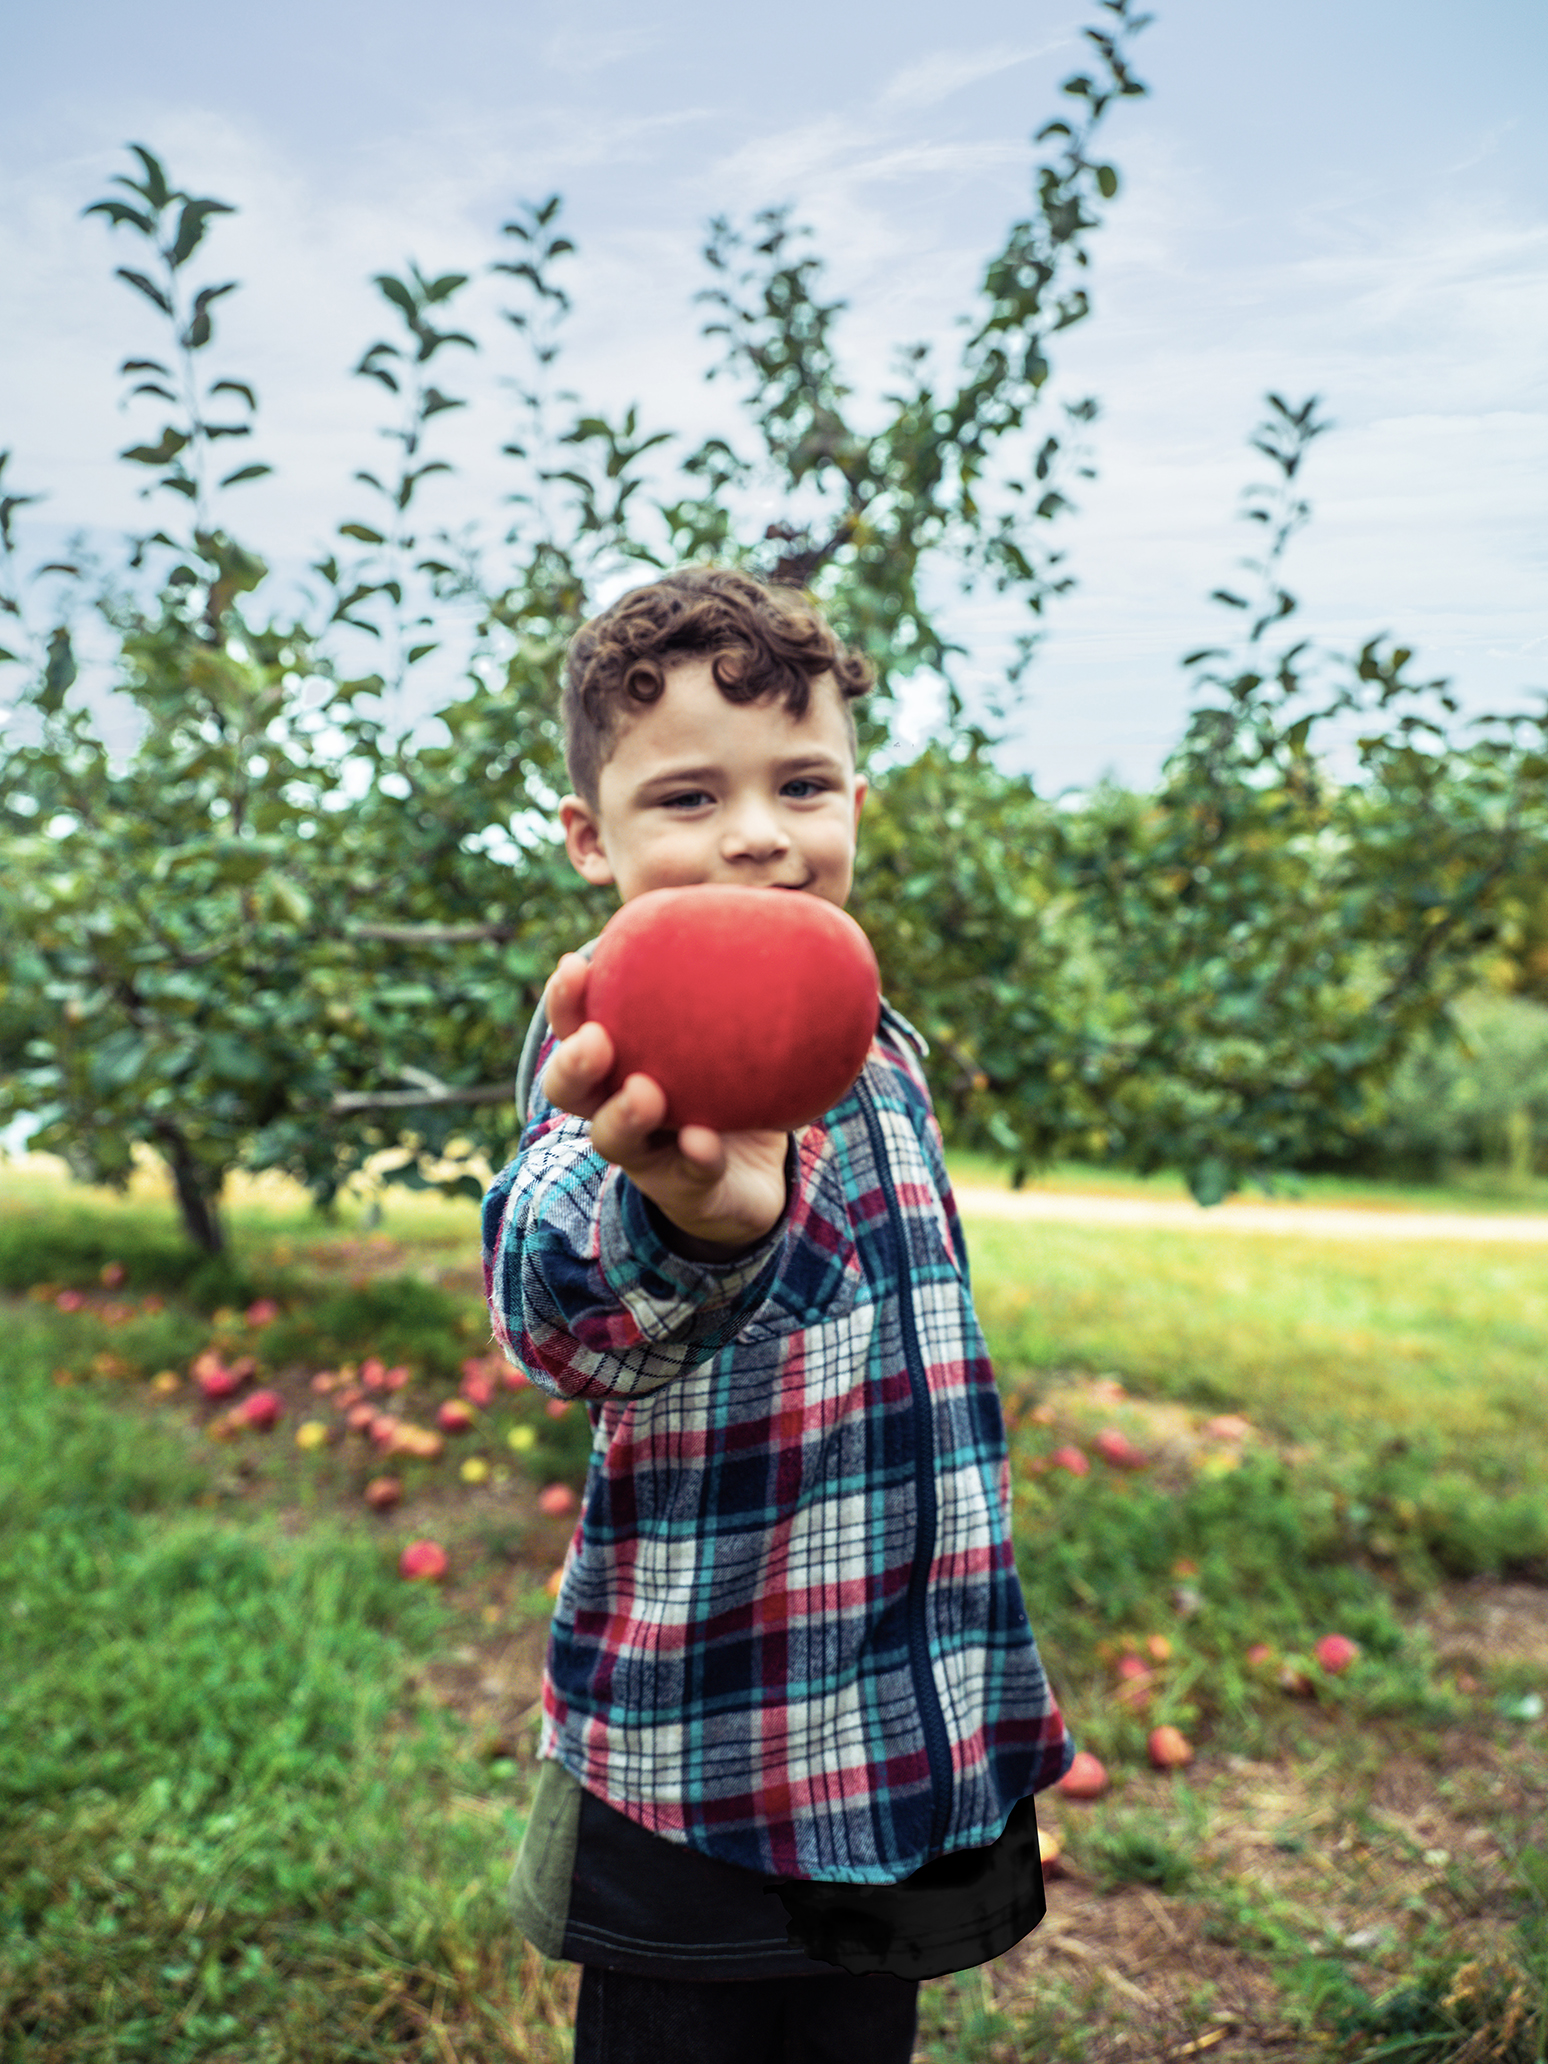 A young boy holding out a freshly picked apple at an apple orchard.